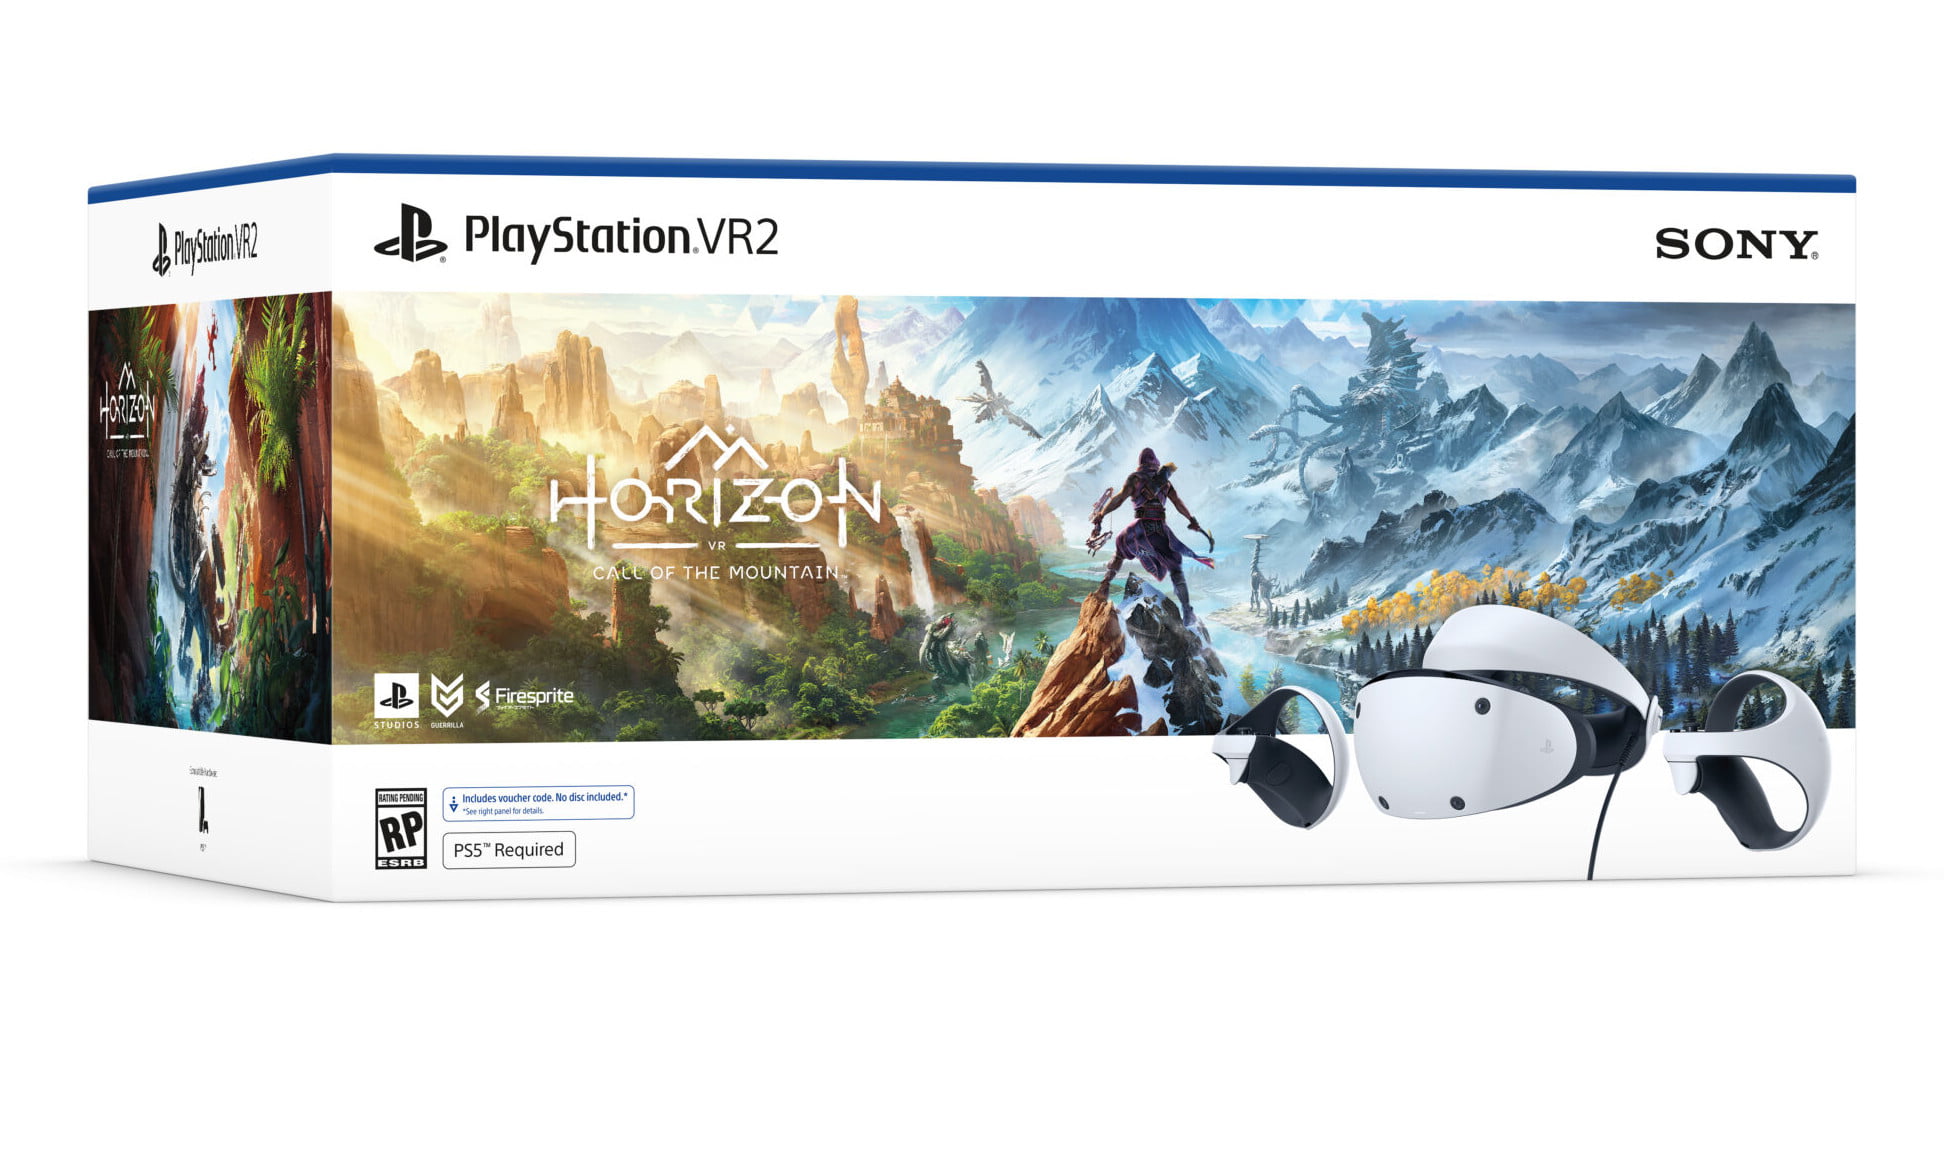 What’s inside the Playstation VR 2 box